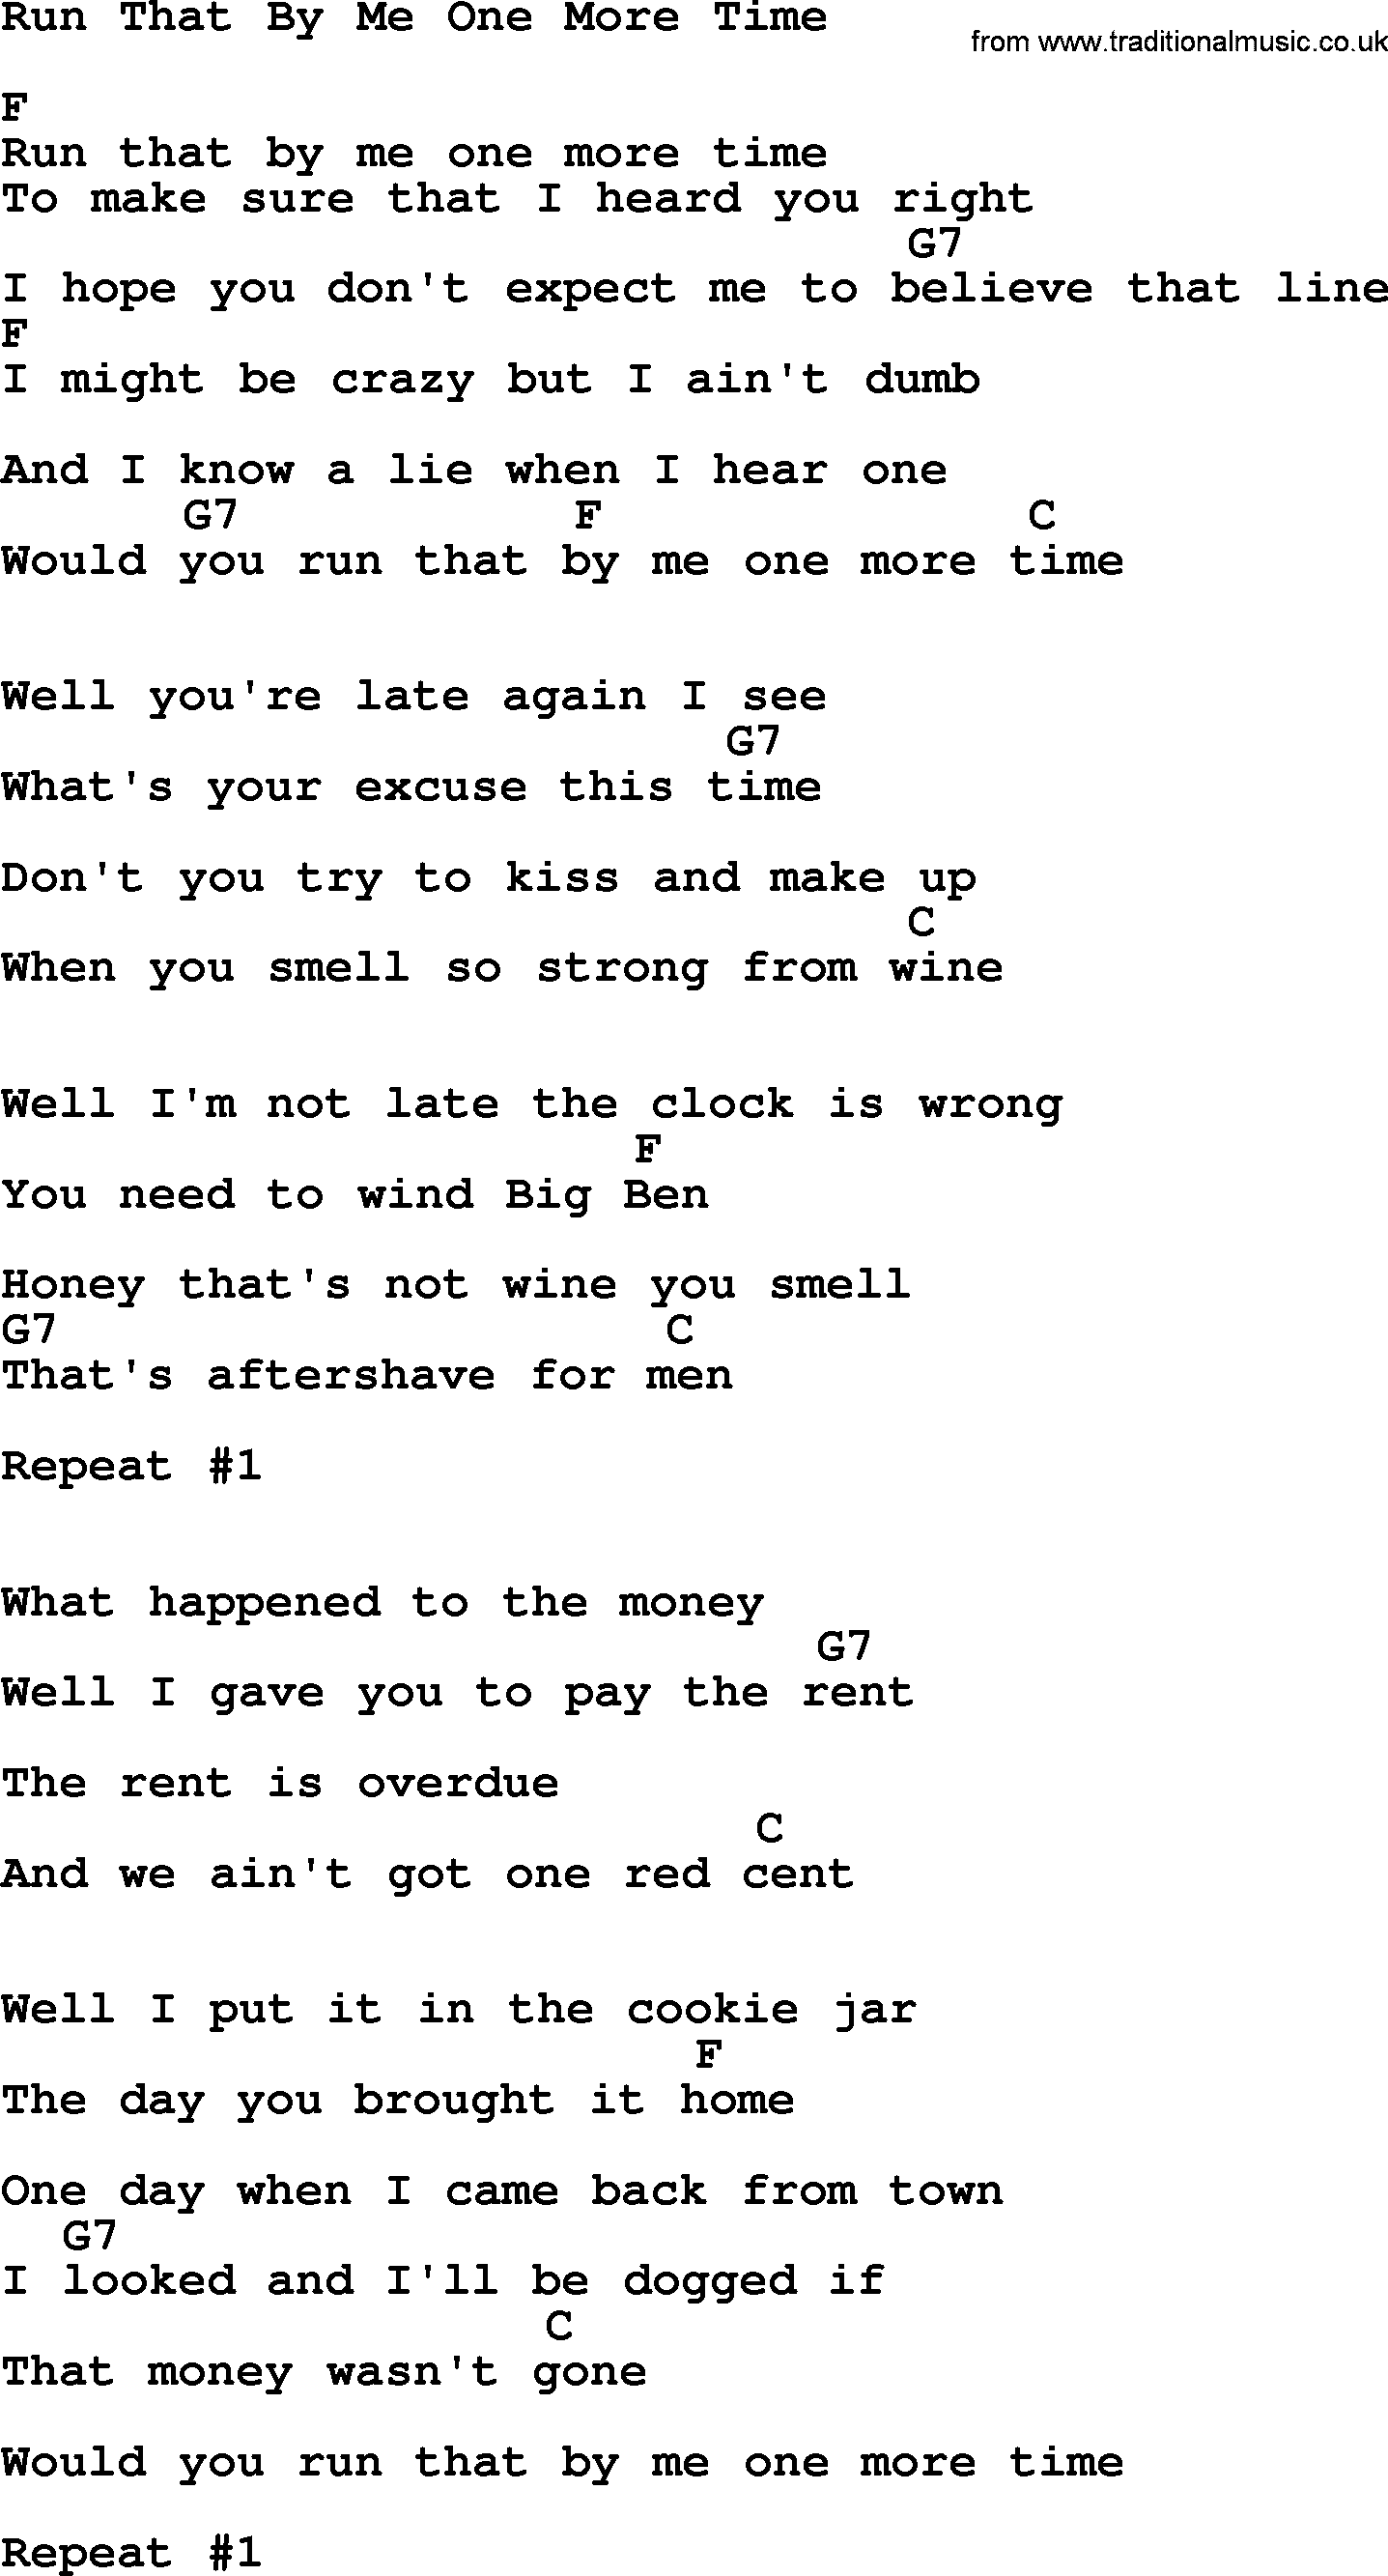 Dolly Parton song Run That By Me One More Time, lyrics and chords